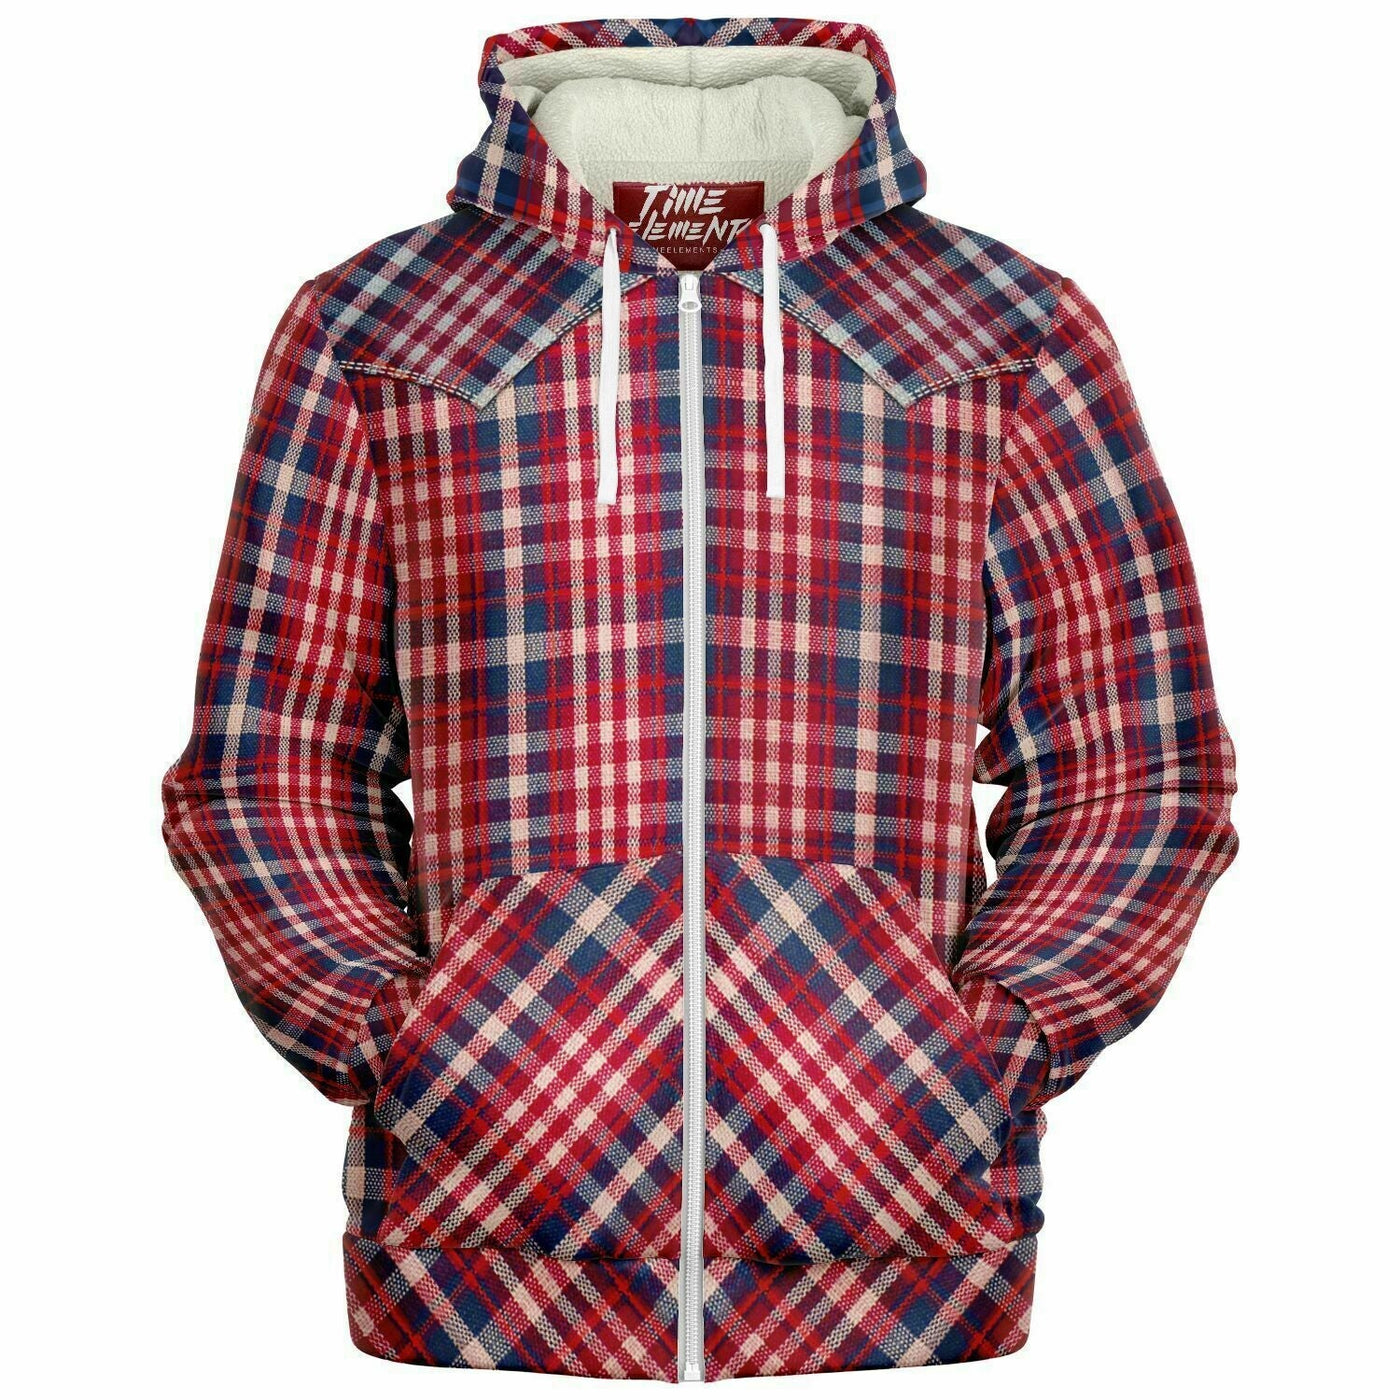 Street Cowboy Sherpa Lined Hoodie with Western Shirt Pattern | TimeElements.shop